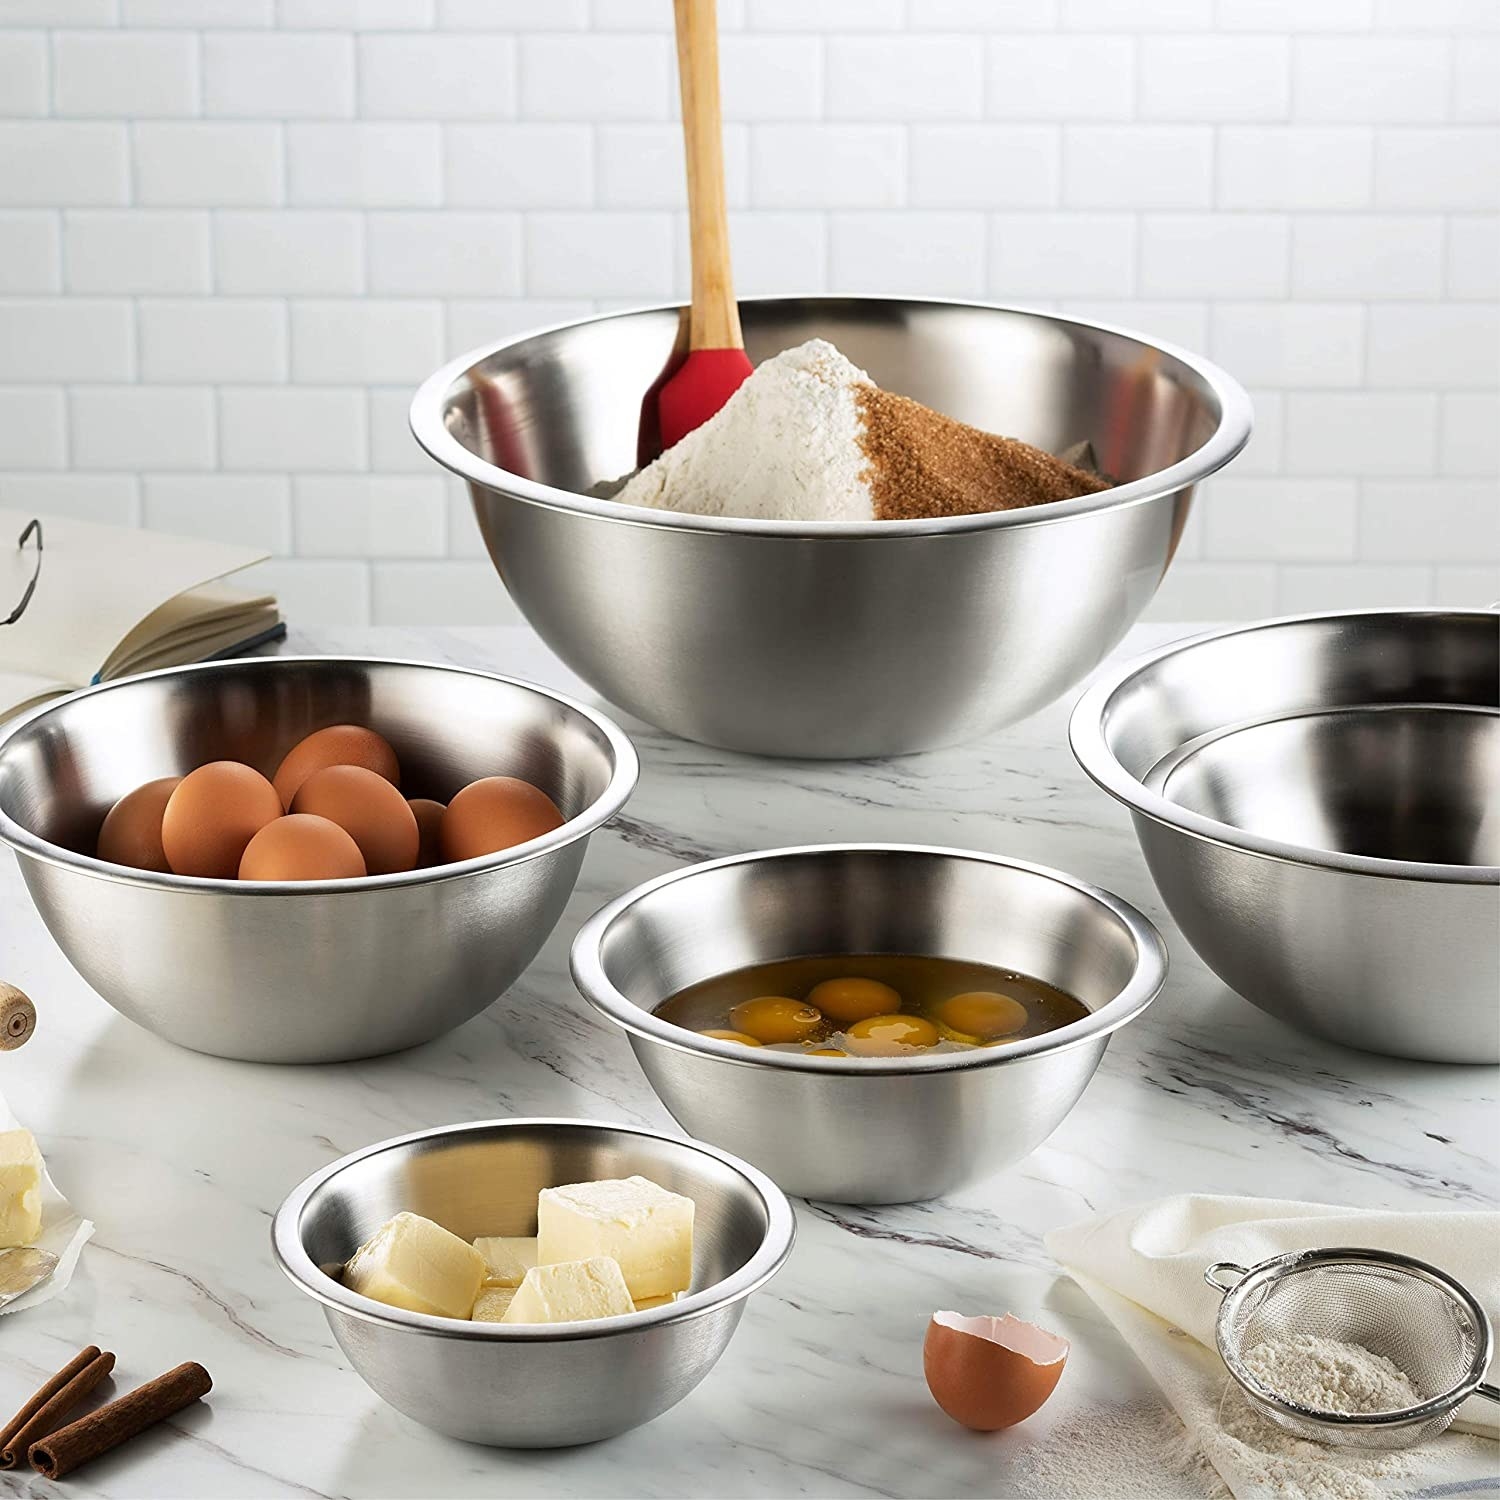 Six stainless steel bowls in different sizes on a counter with different food in each one